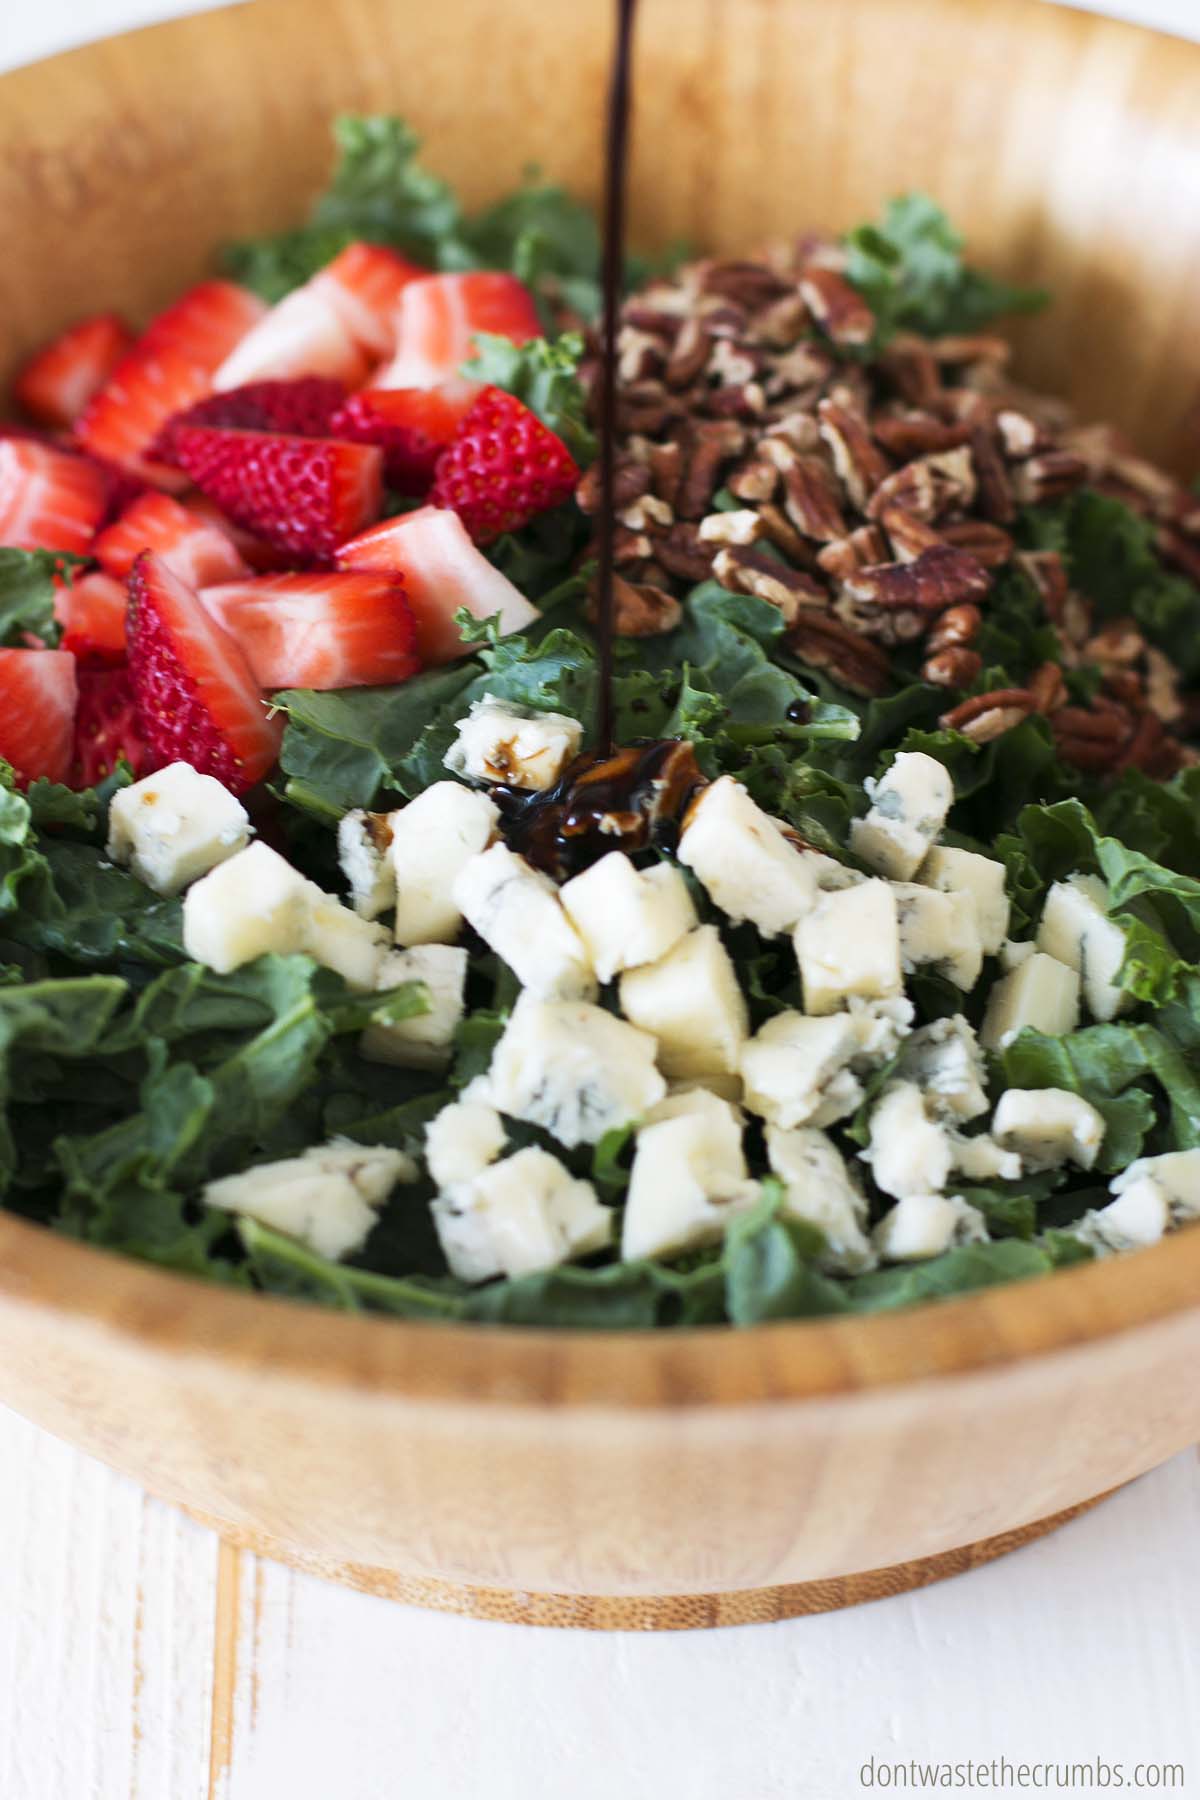 Pouring balsamic vinaigrette onto a kale salad recipe with strawberries, pecans and blue cheese.